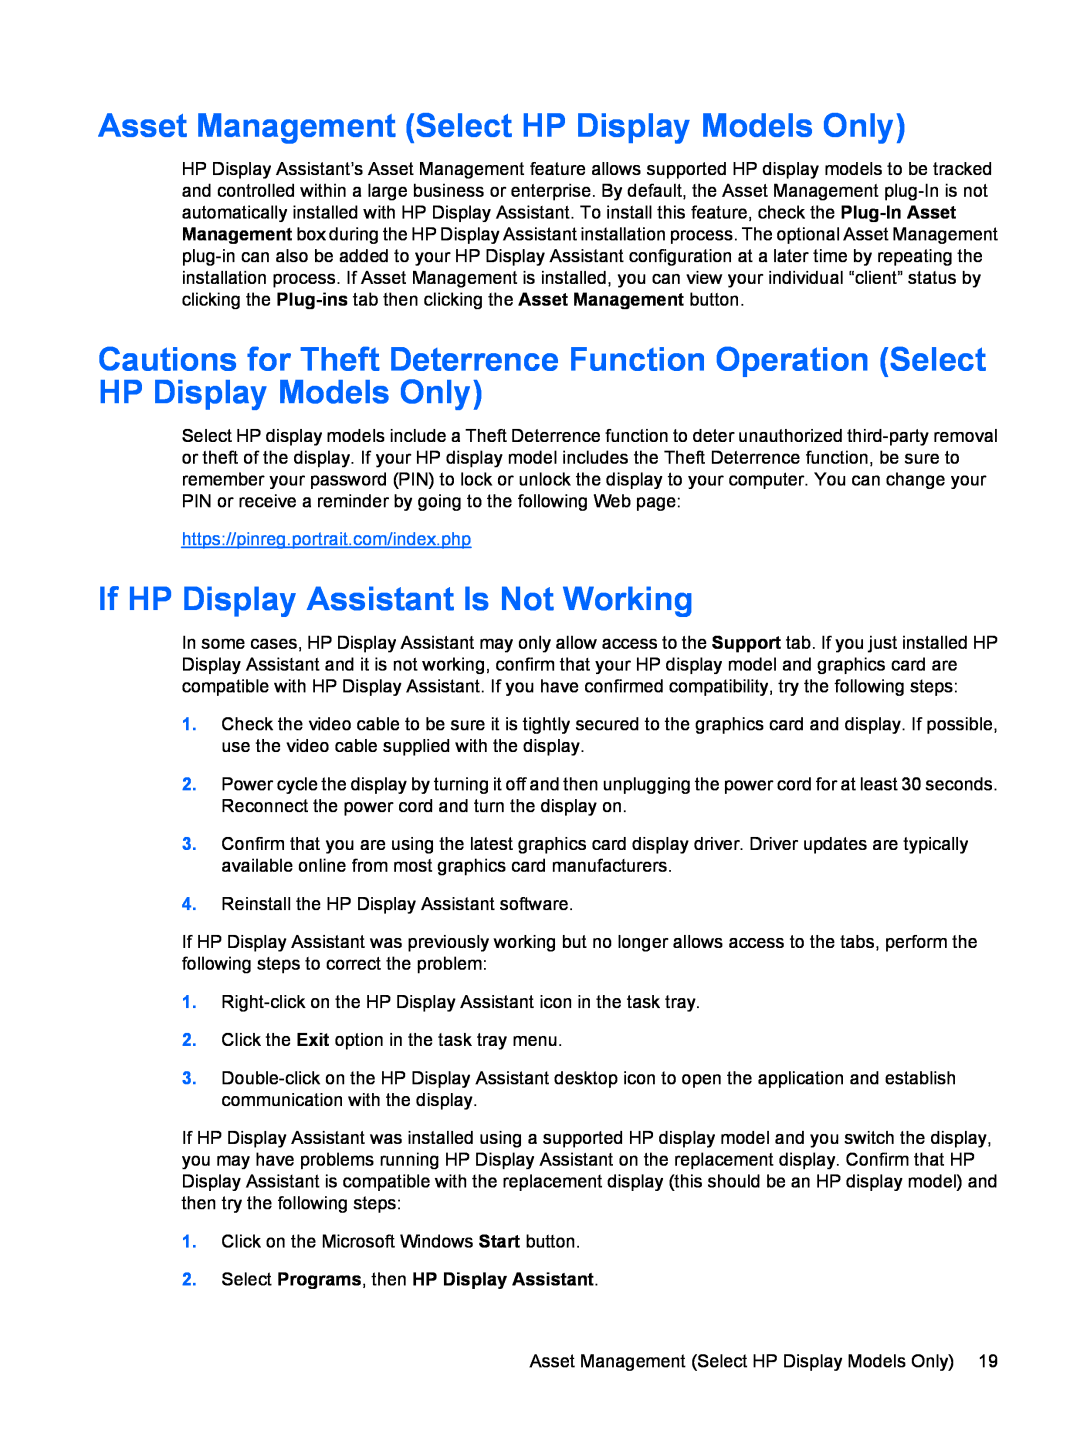 HP L1950 19-inch manual Asset Management Select HP Display Models Only, If HP Display Assistant Is Not Working 